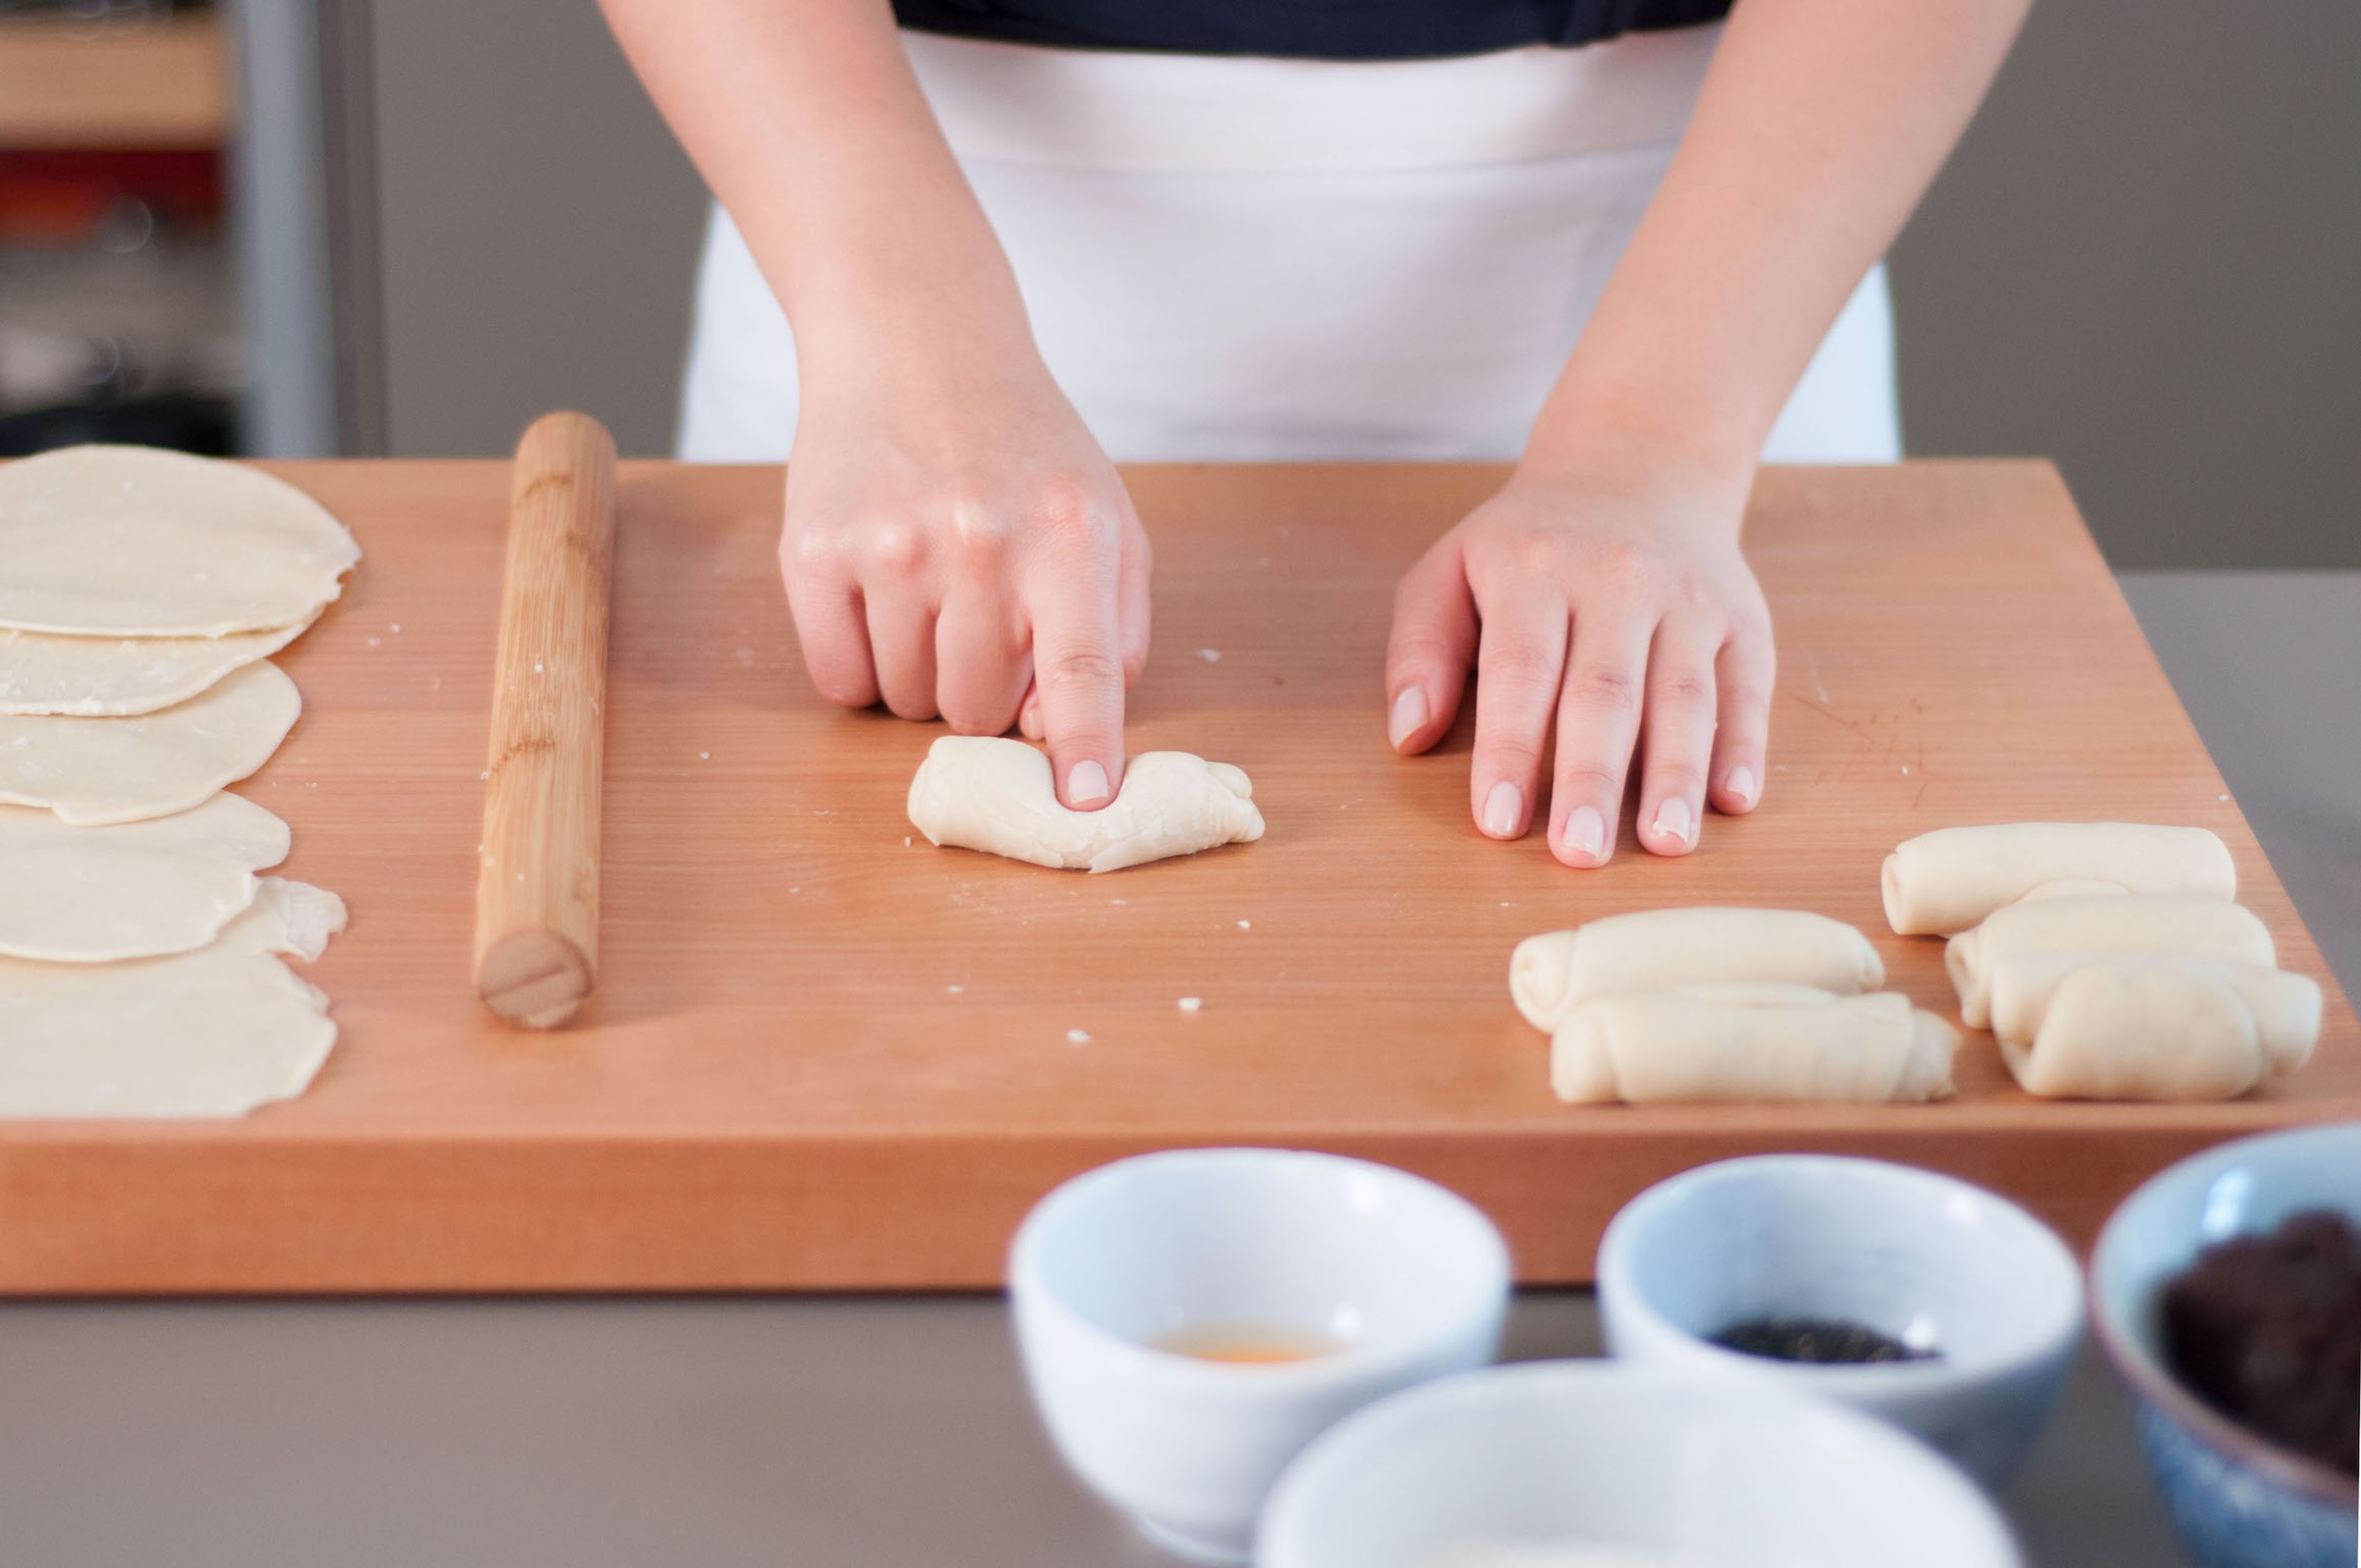 Make an indentation in the center of each roll with your finger. Wrap the dough into a circle with the indentation at its center. Shape into a smooth ball and roll this ball into a thin, round disc.